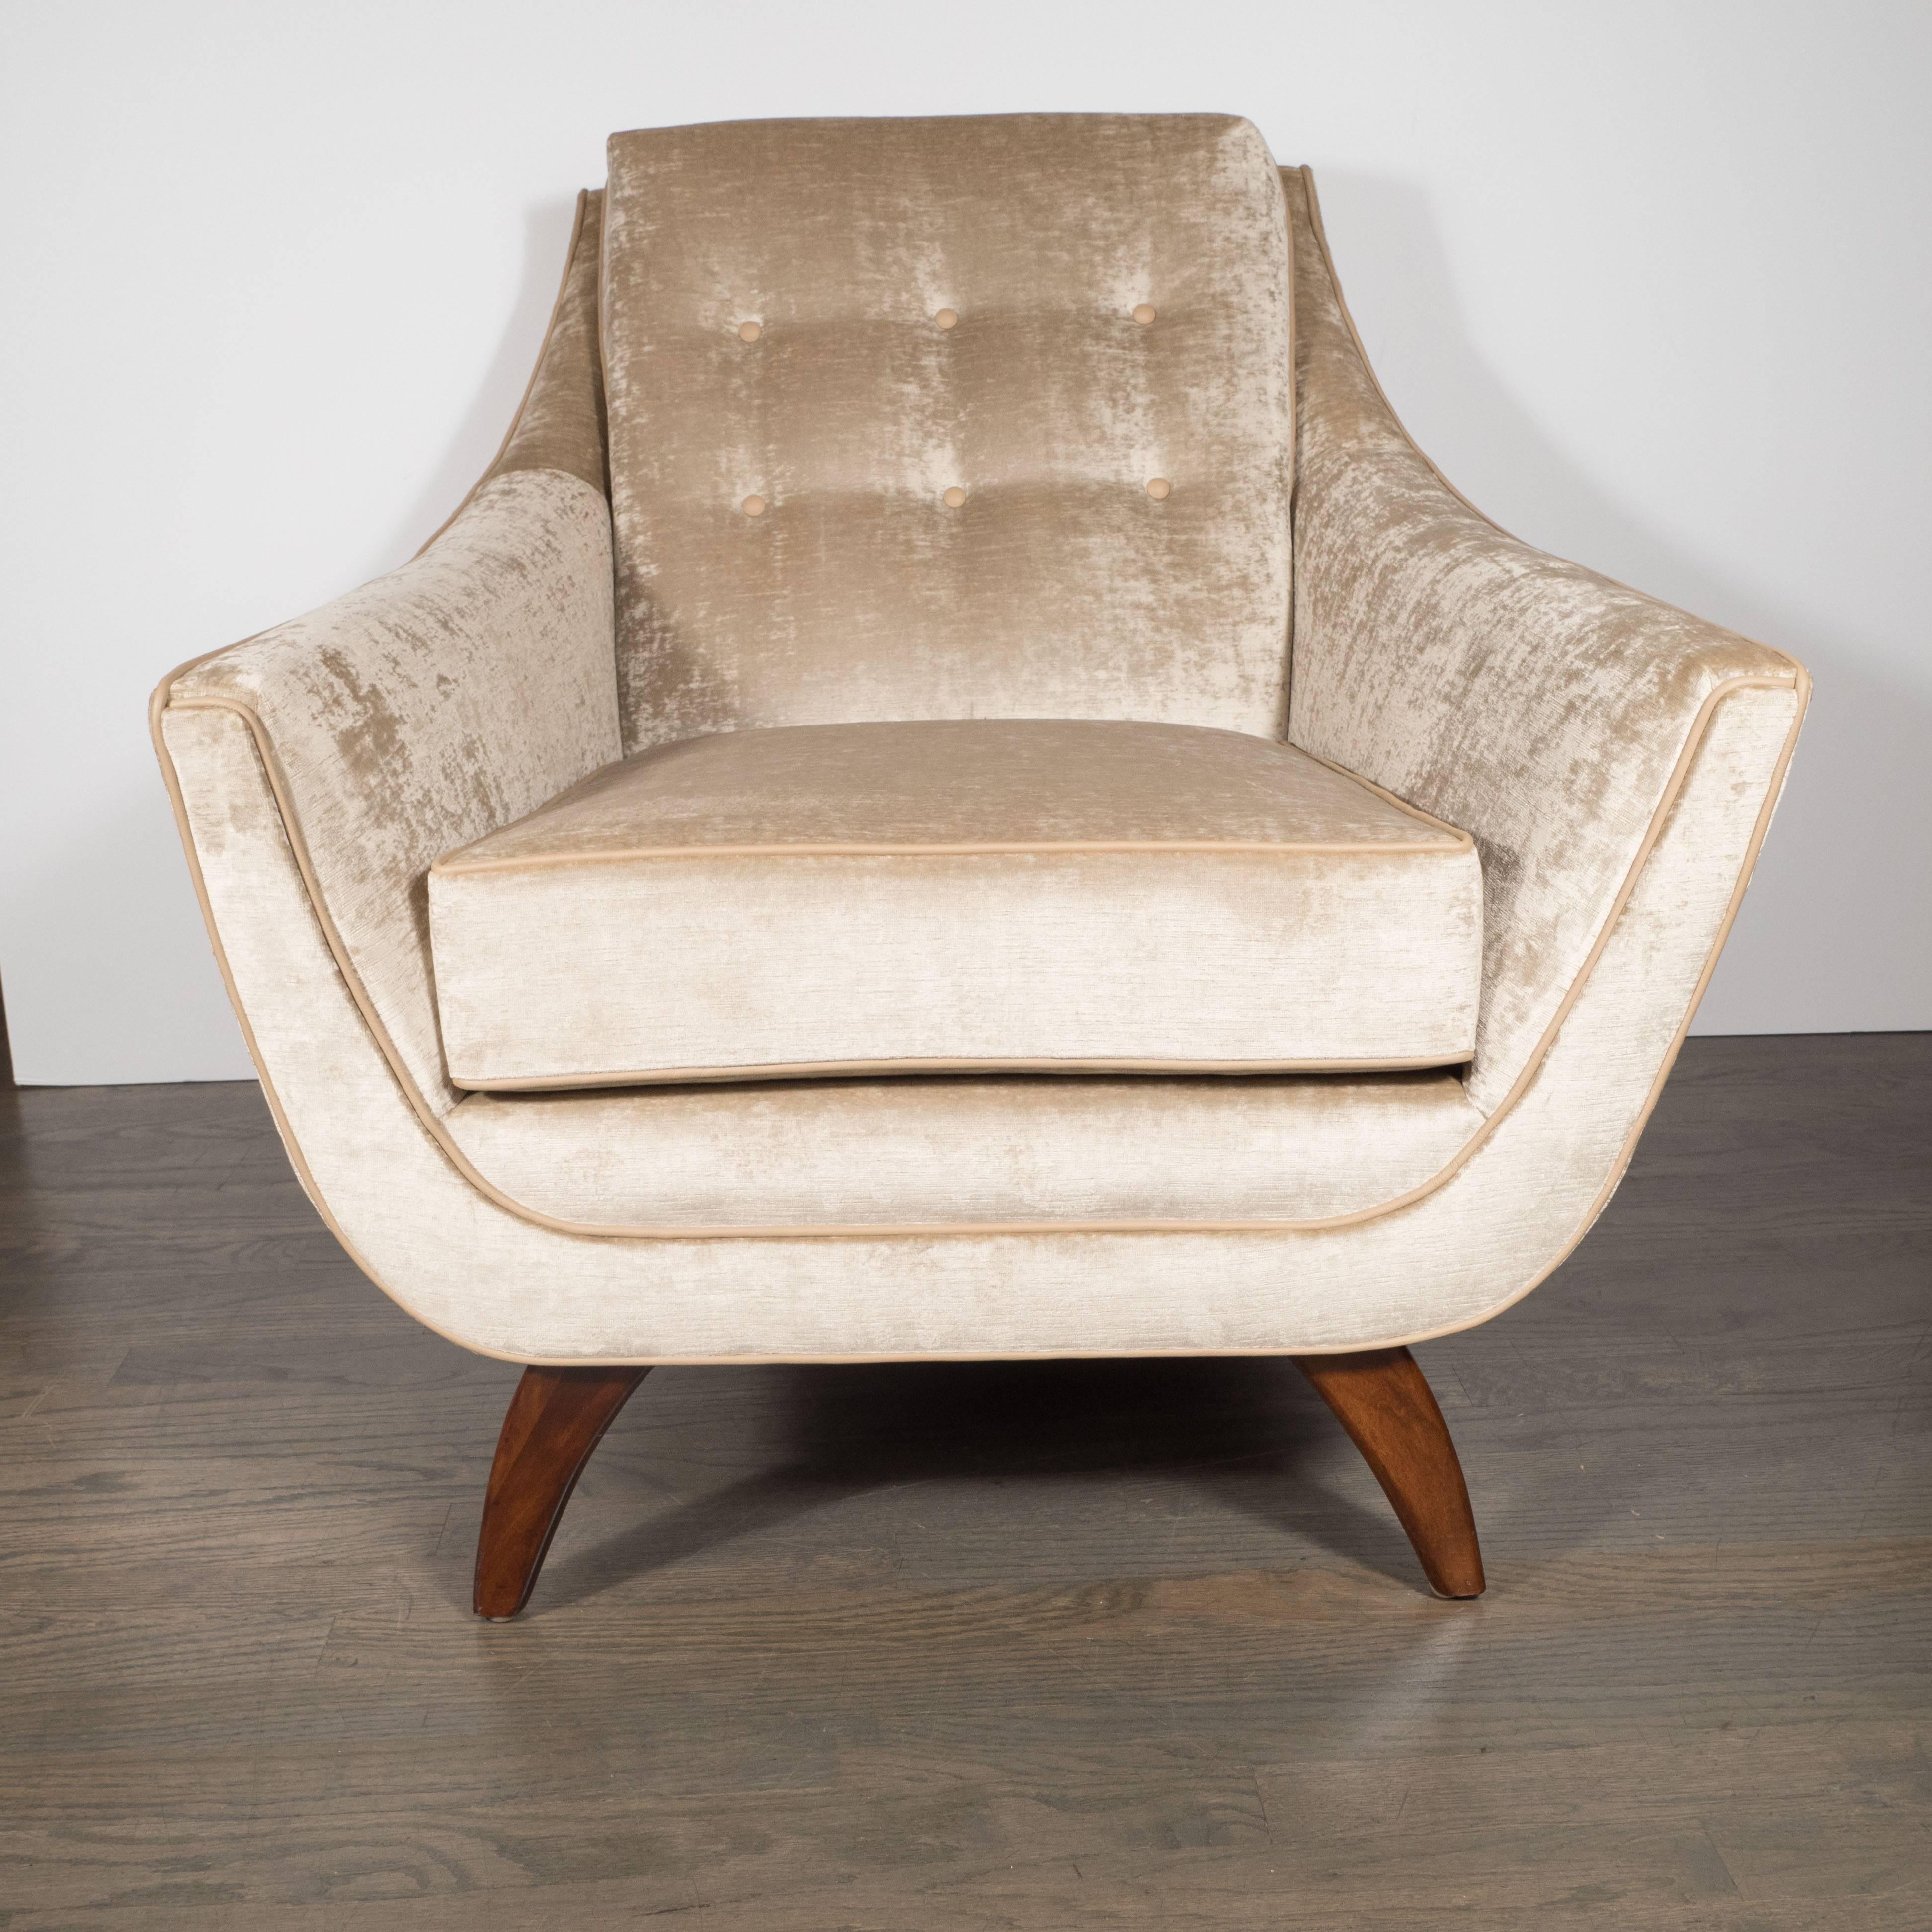 This refined Mid-Century Modern chair was realized in the United States, circa 1960. It offers the sinuous curves and superlative craftsmanship that collectors of the period prize, including champagne leather piping along the perimeter and button